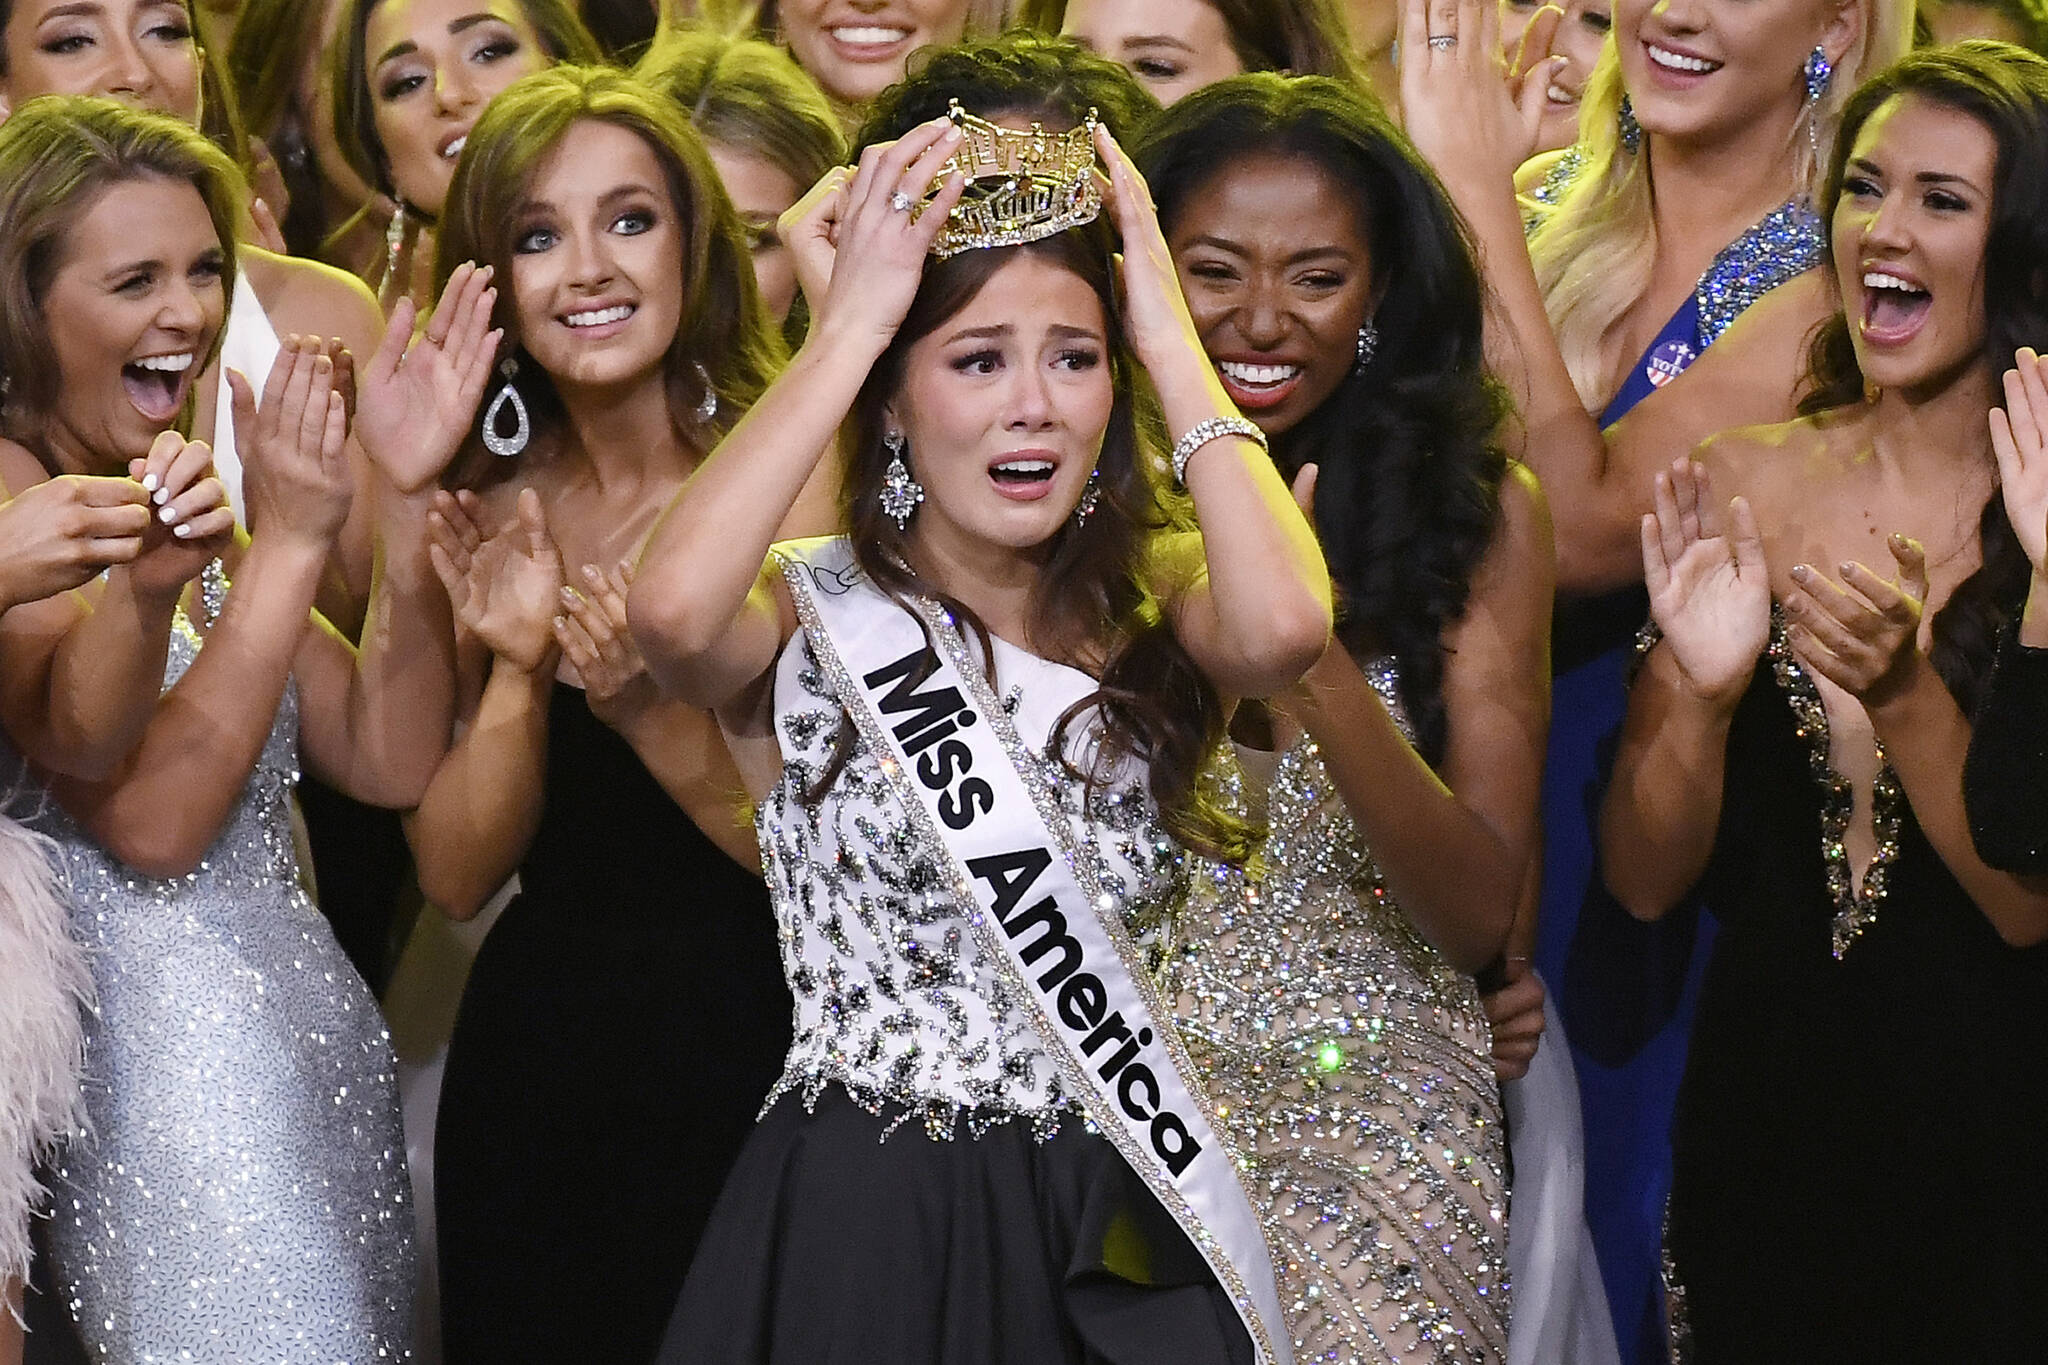 Miss Alaska Emma Broyles, center, reacts after being crowned Miss America at Mohegan Sun, Thursday, Dec. 16, 2021, in Uncasville, Conn. (AP Photo/Jessica Hill)